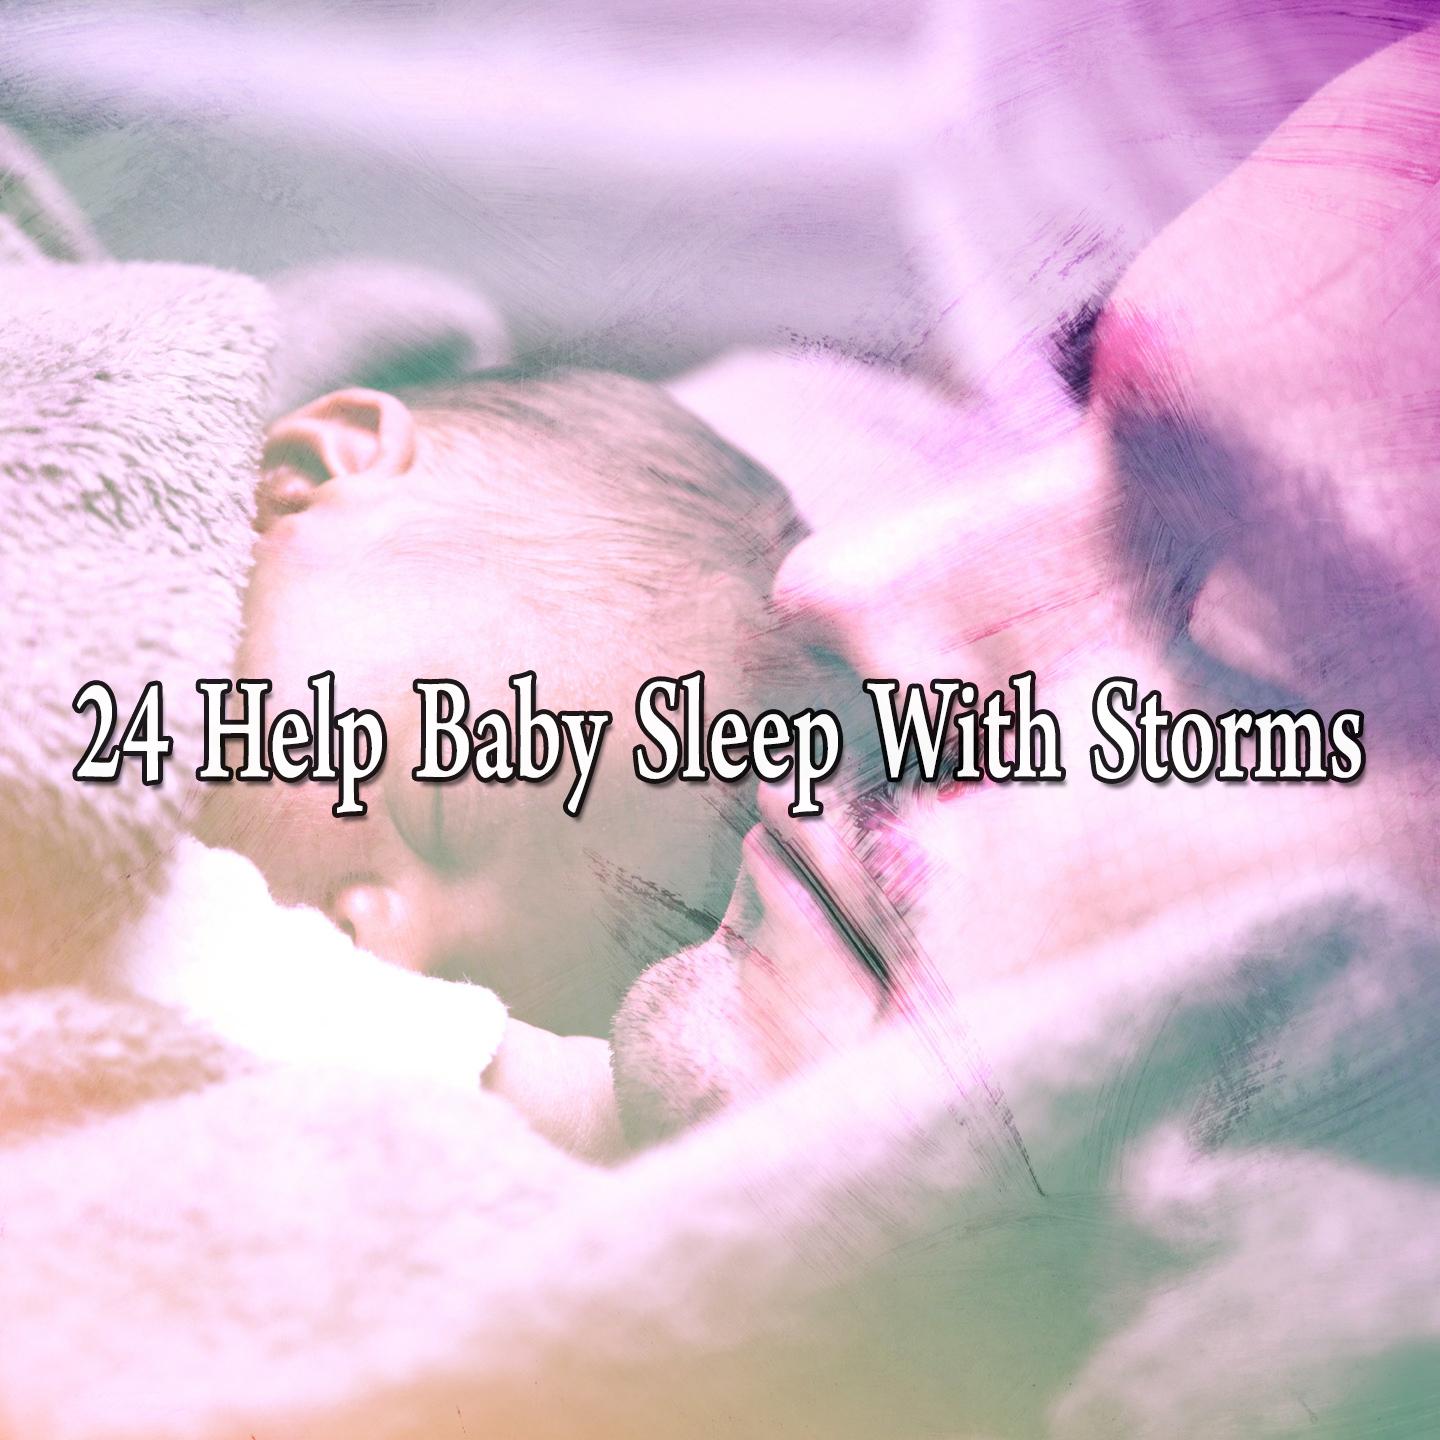 24 Help Baby Sleep with Storms